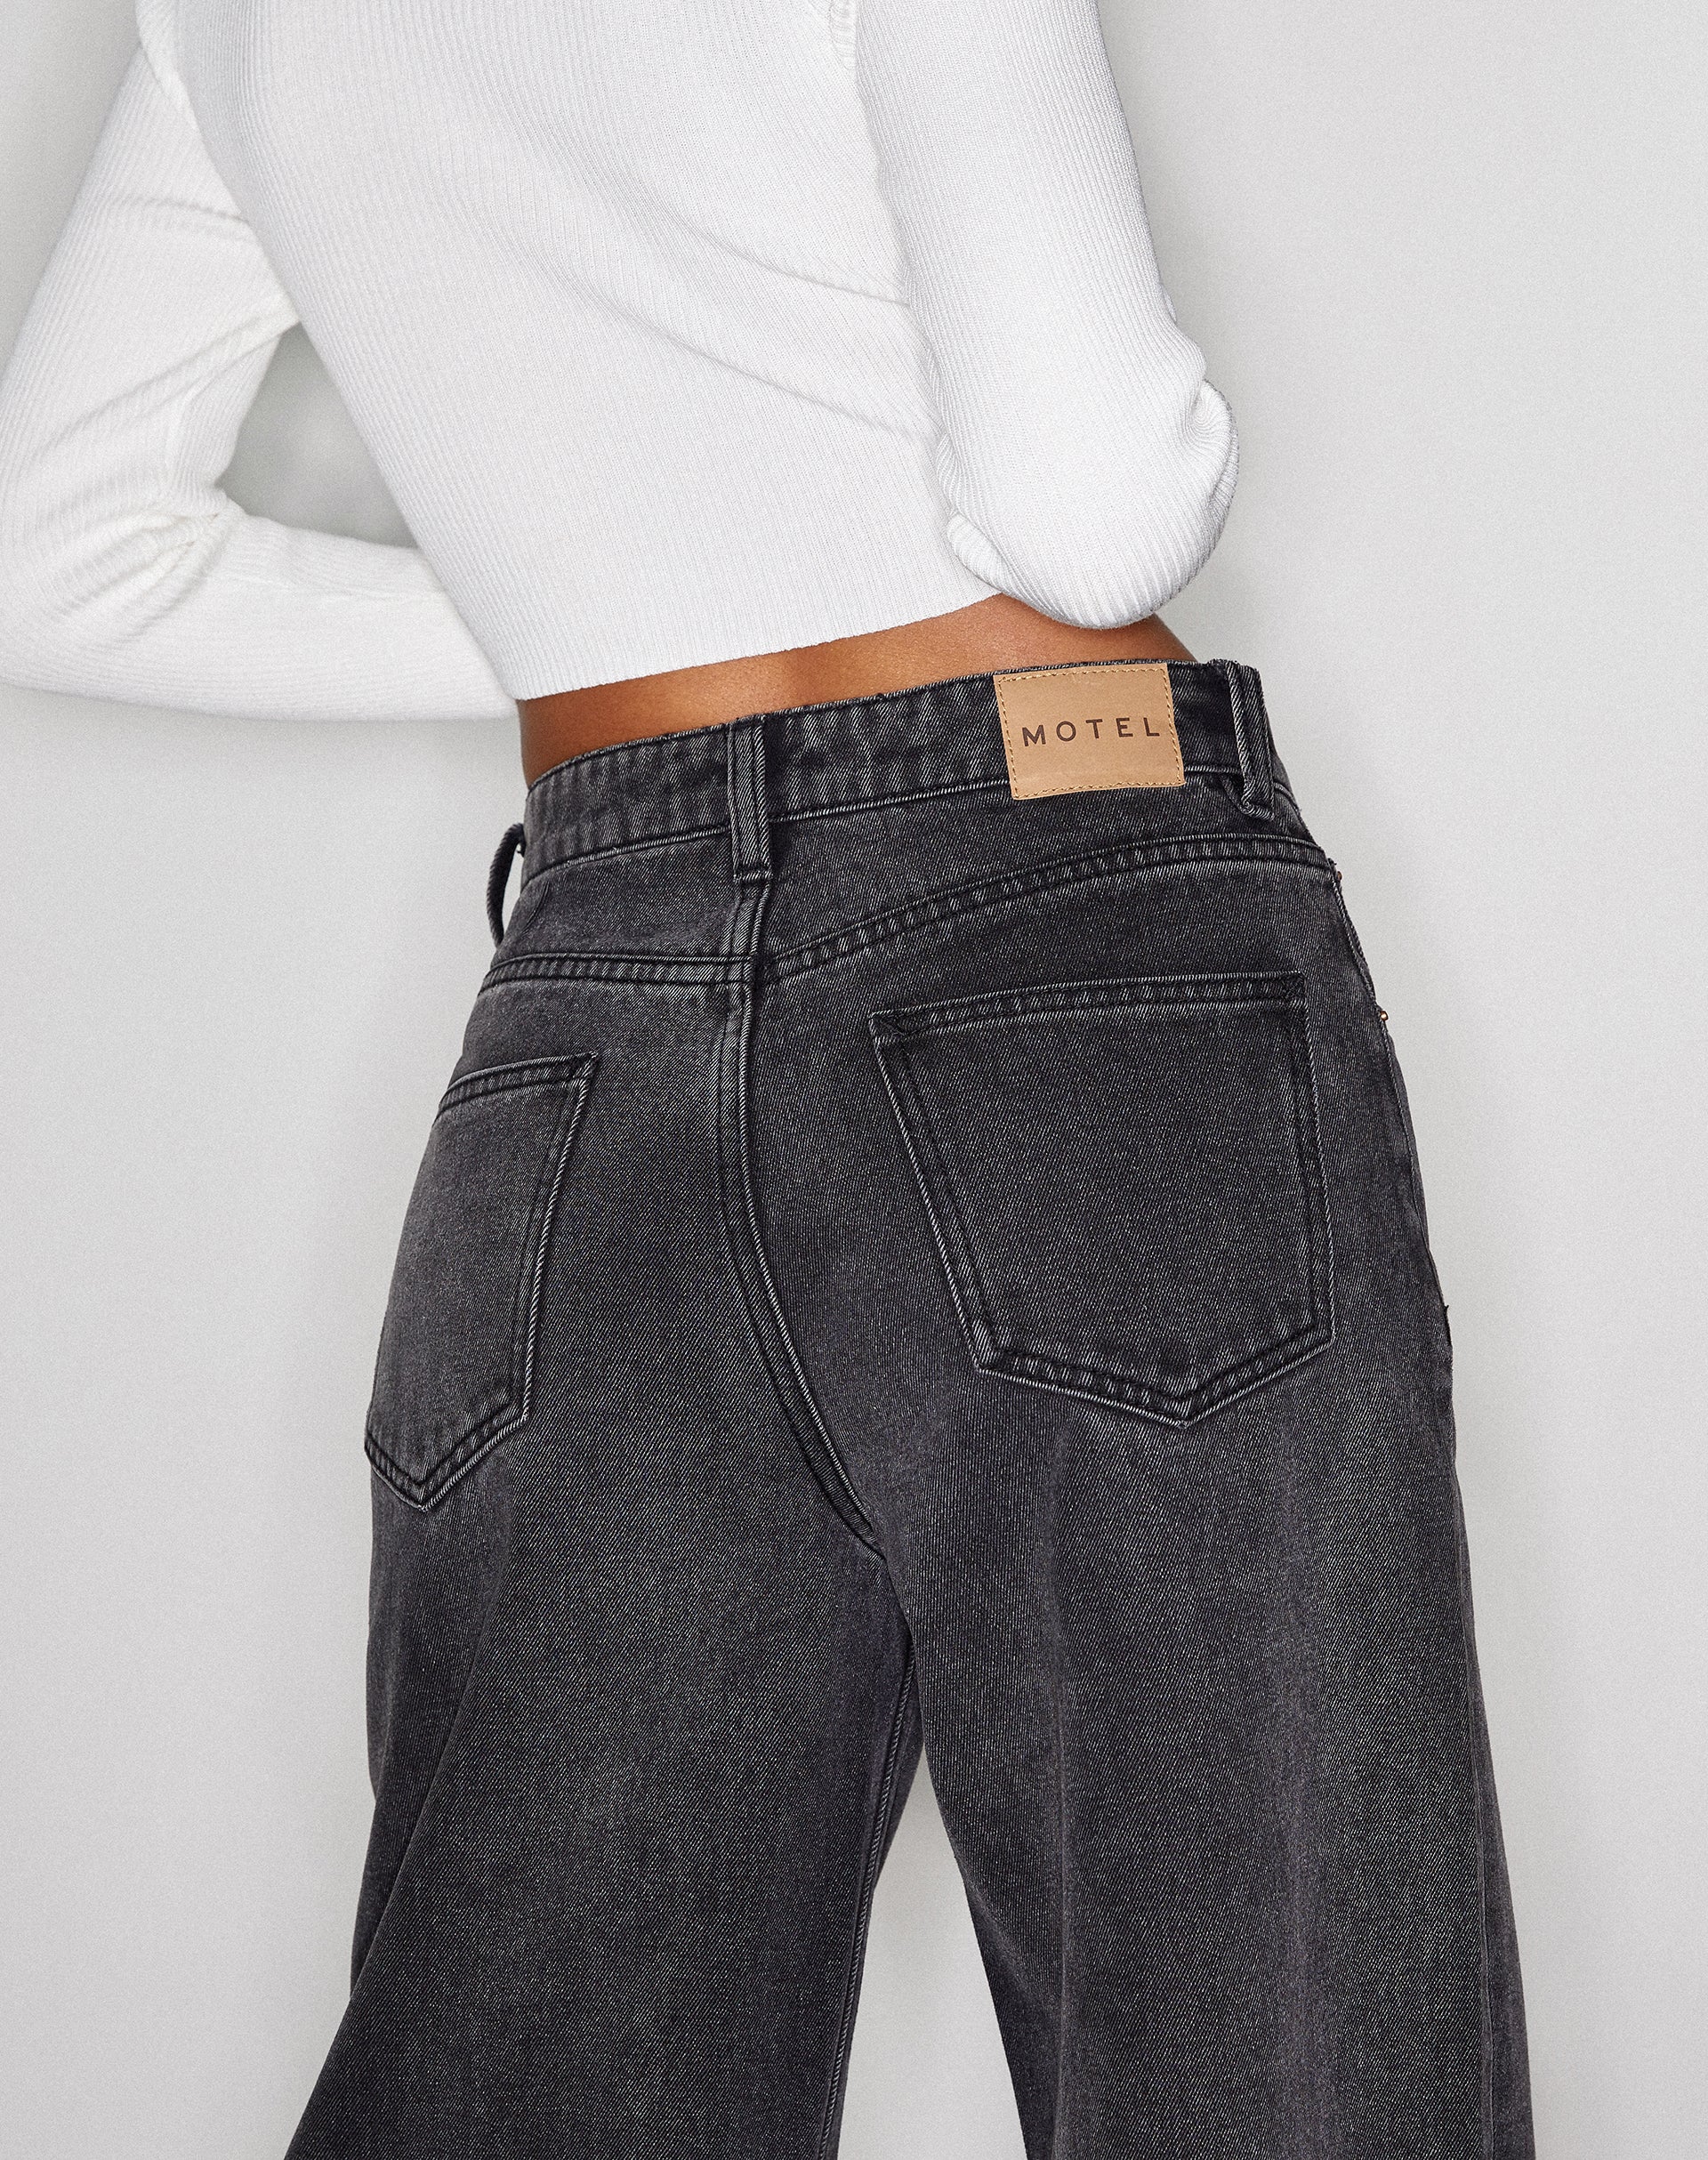 image of Extra Wide Jean in Black Wash